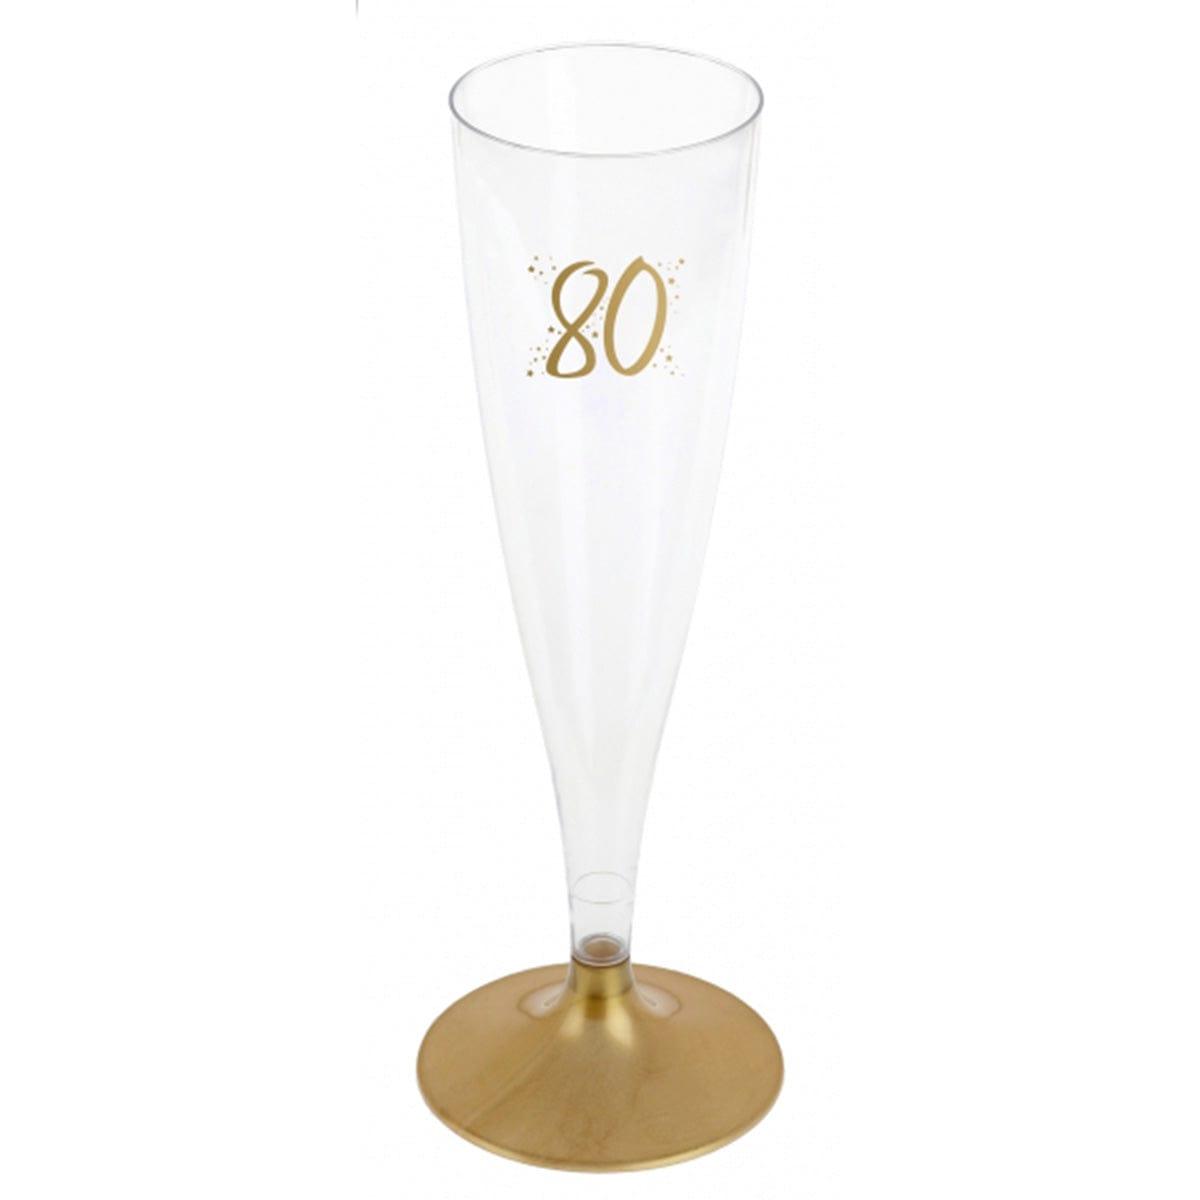 SANTEX Age Specific Birthday 80th Birthday Champagne Flute, Gold, 6 Count